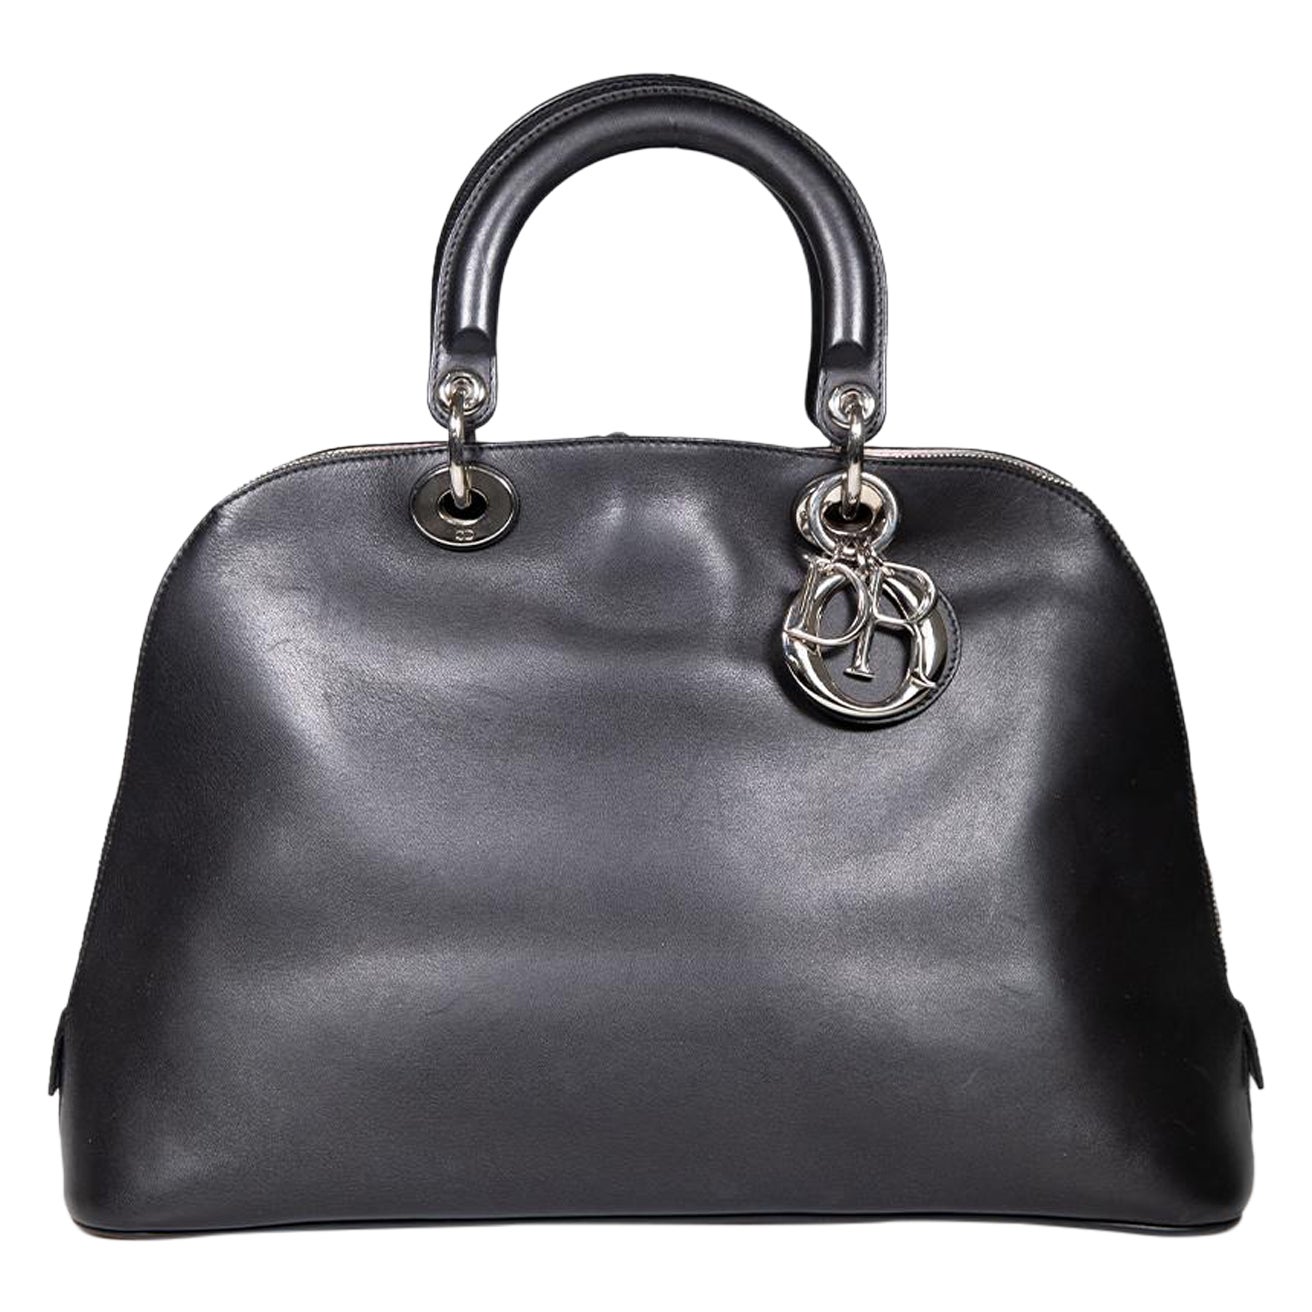 Dior 2012 Black Leather Diorissimo Top-Handle Bag For Sale